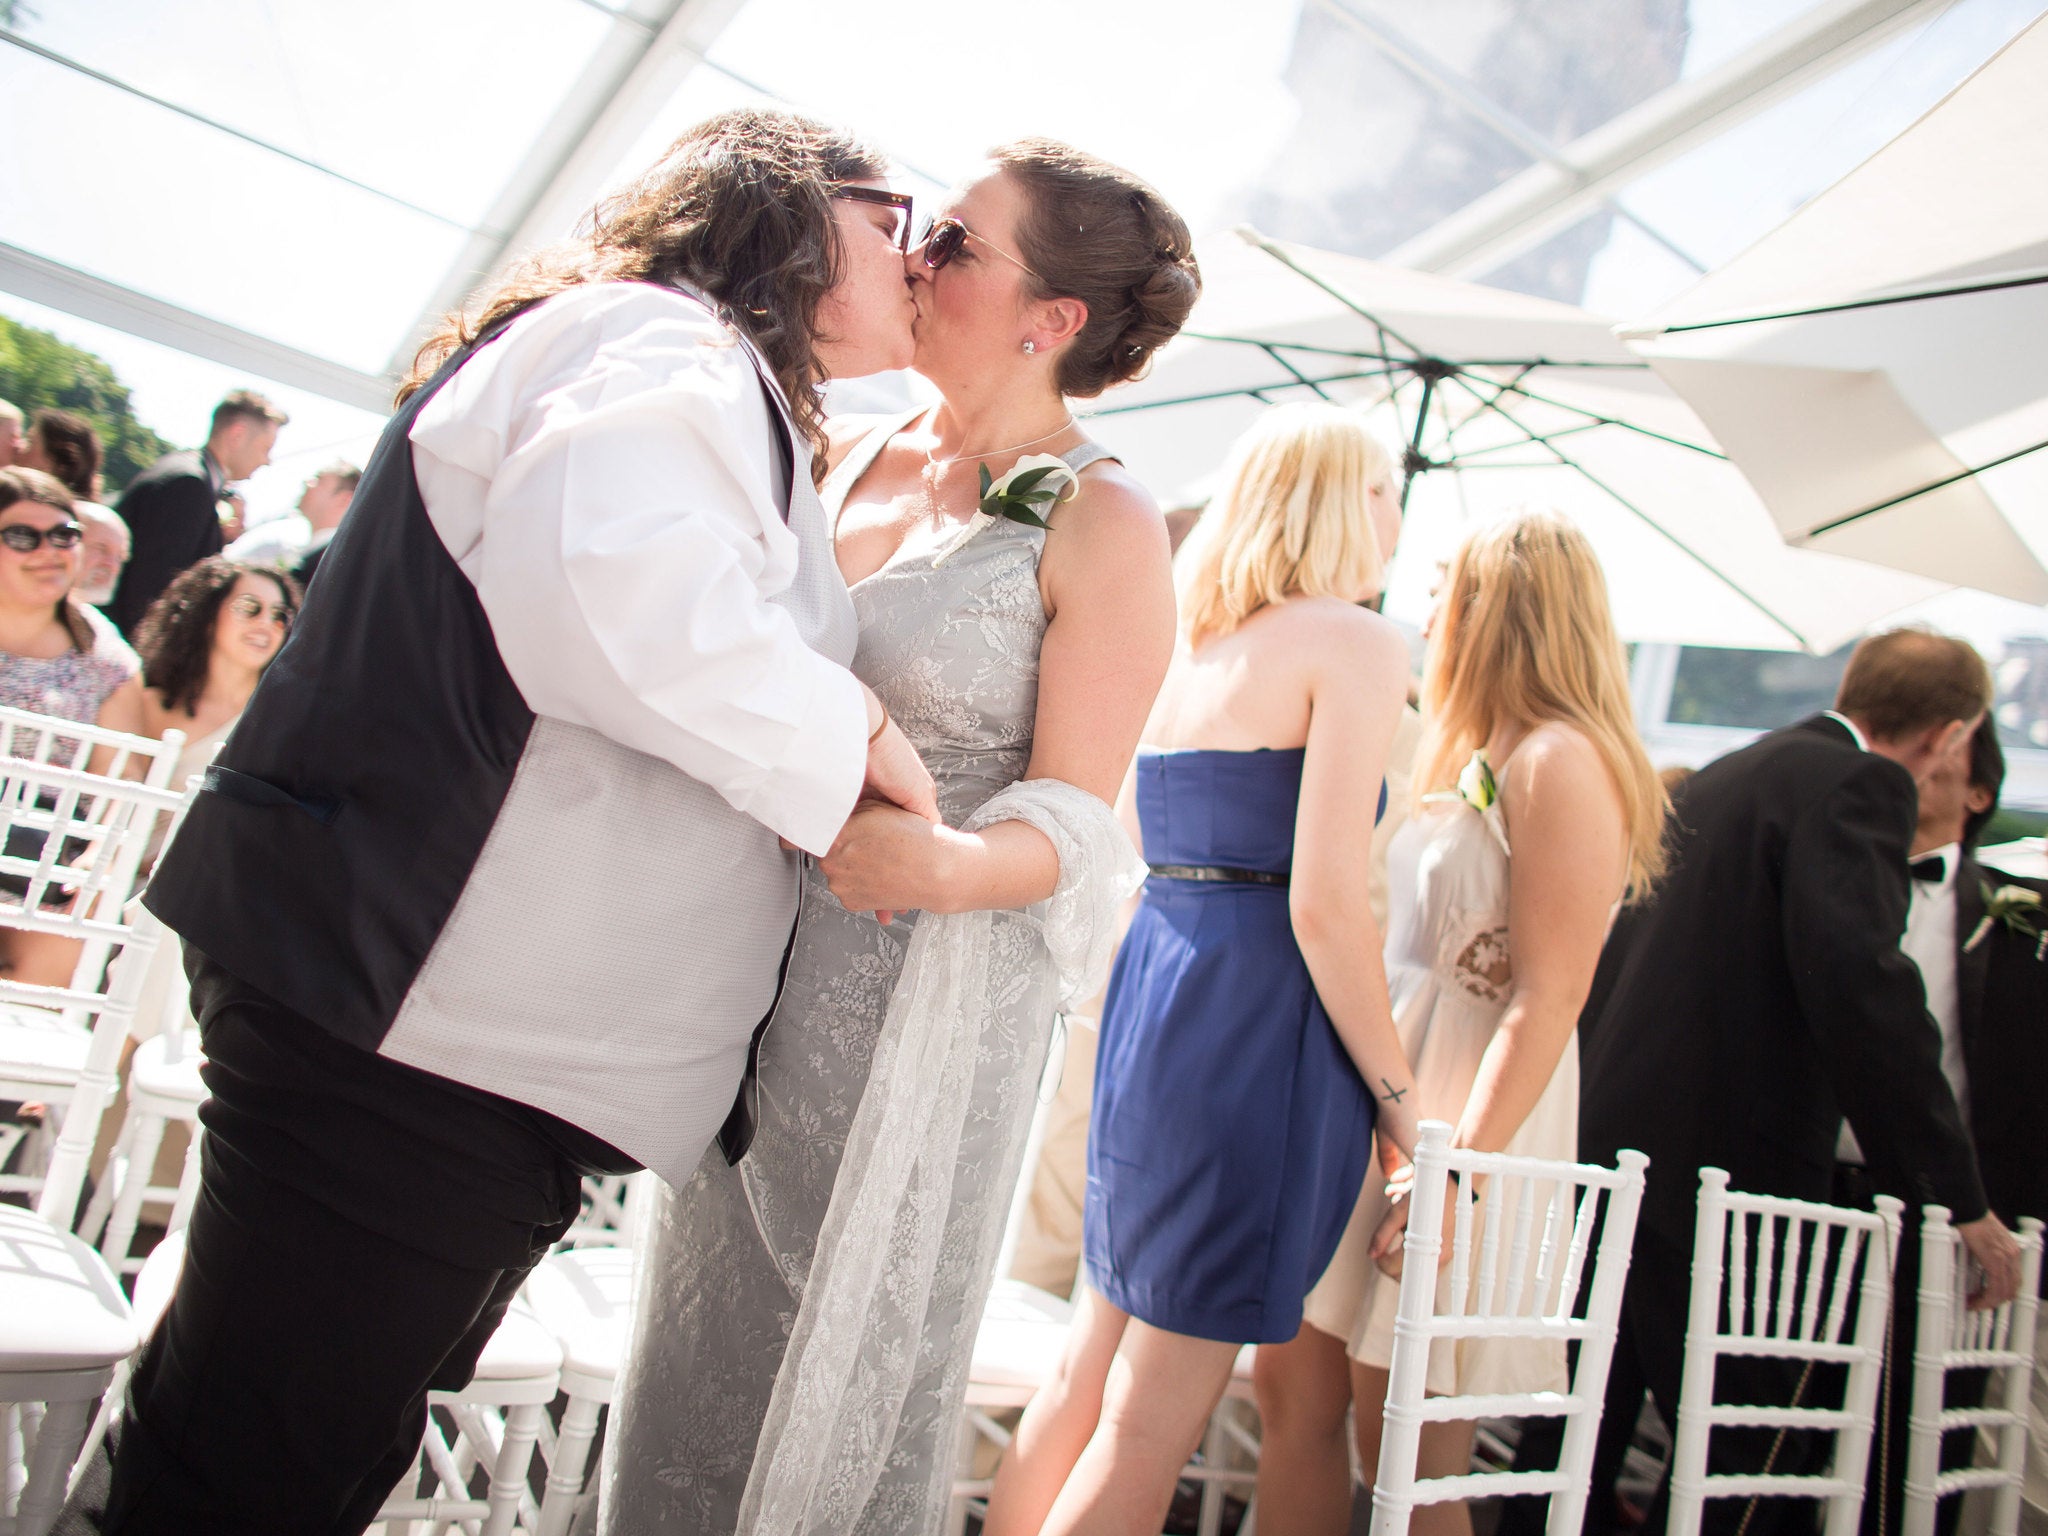 Caption:A couple seals their marriage with a kiss as over one hundred of other LGBT couples celebrate their nuptials at the Grand Pride Wedding, a mass gay wedding at Casa Loma in Toronto, Canada, on June 26, 2014.